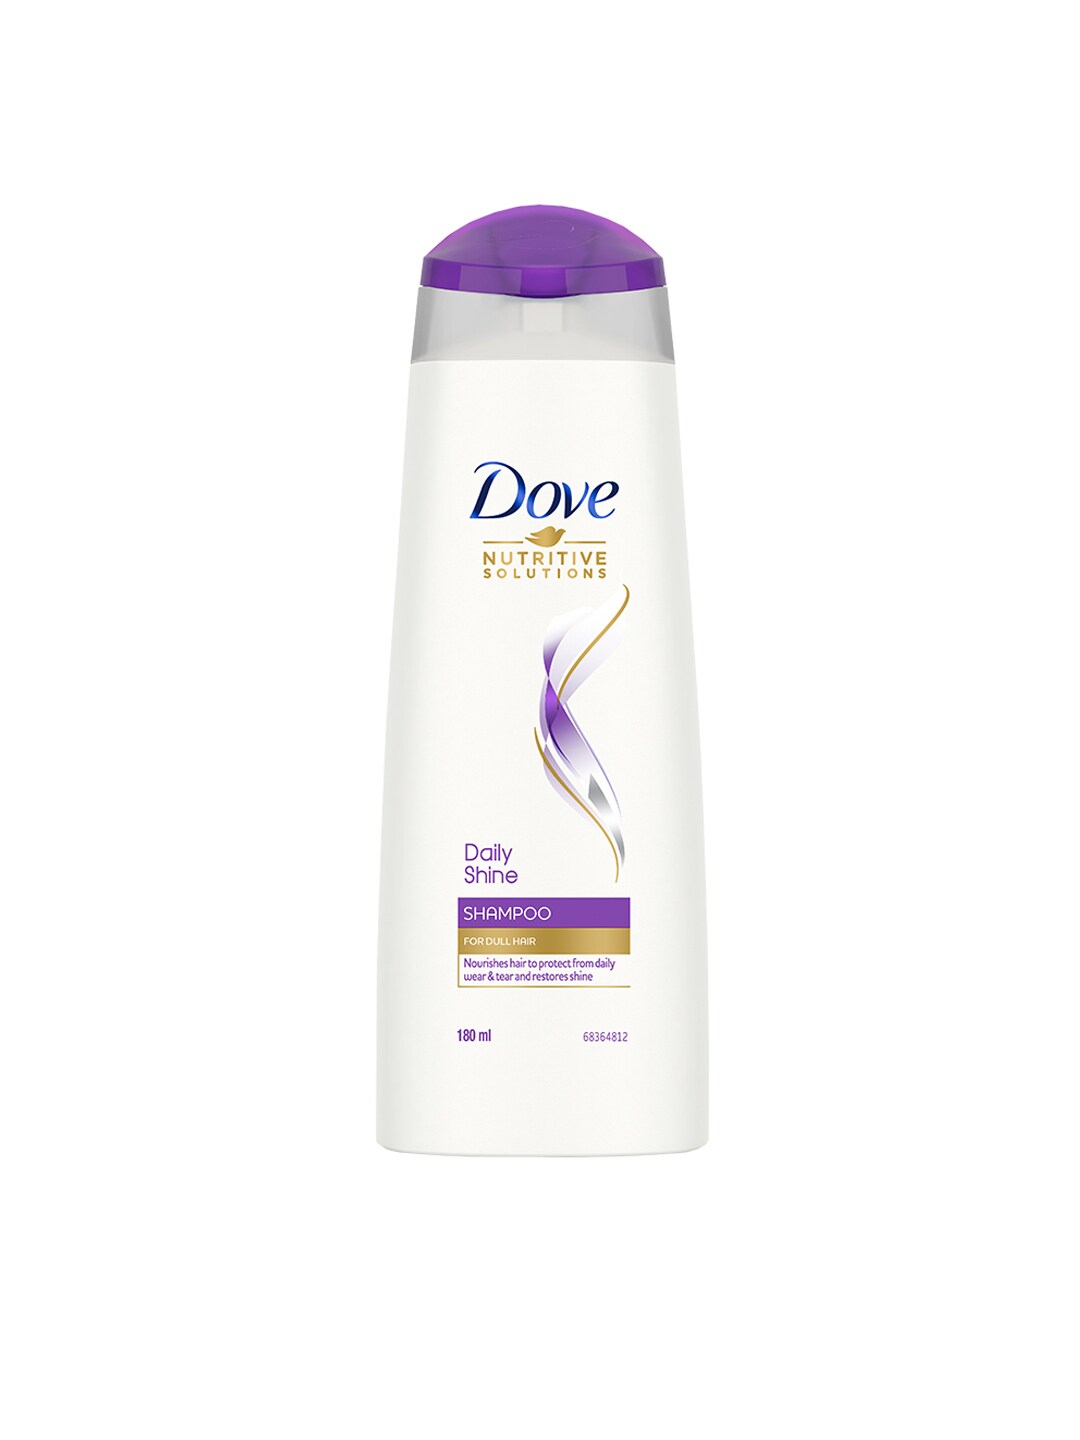 Dove Hair Therapy Daily Shine Shampoo 180 ml Price in India